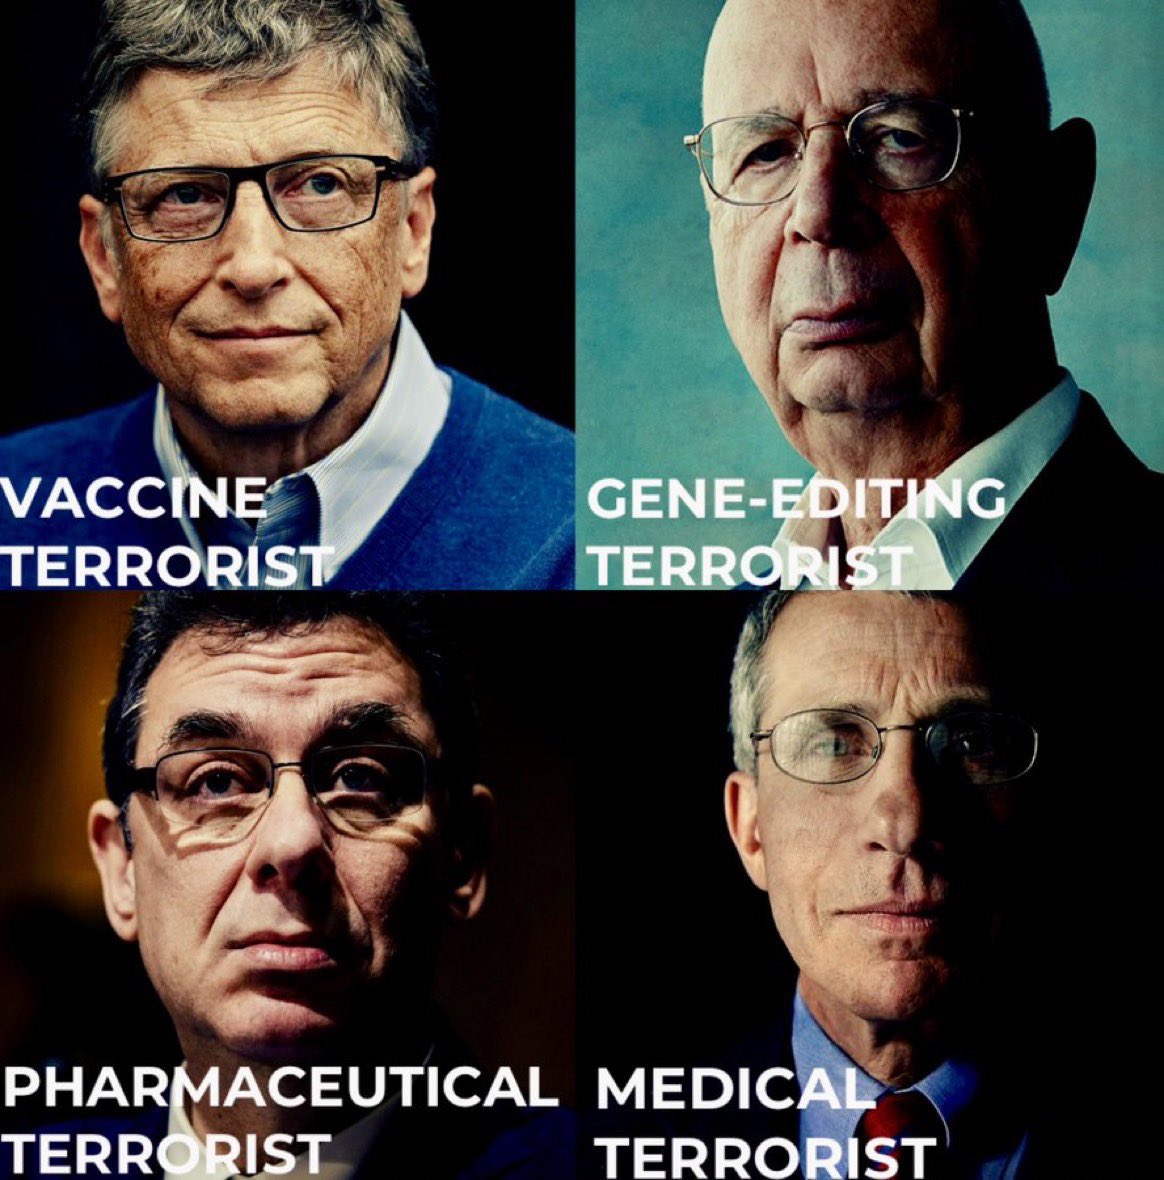 ~ The Real Virus - Enemies of humanity! The true goal of this project is power; The pure genius of the plan was the fear.' To control the world's information is to manipulate all the minds that consume it Bastard & soros, schwab, Fauci #Virus #infosec Son of Bitch @BillGates